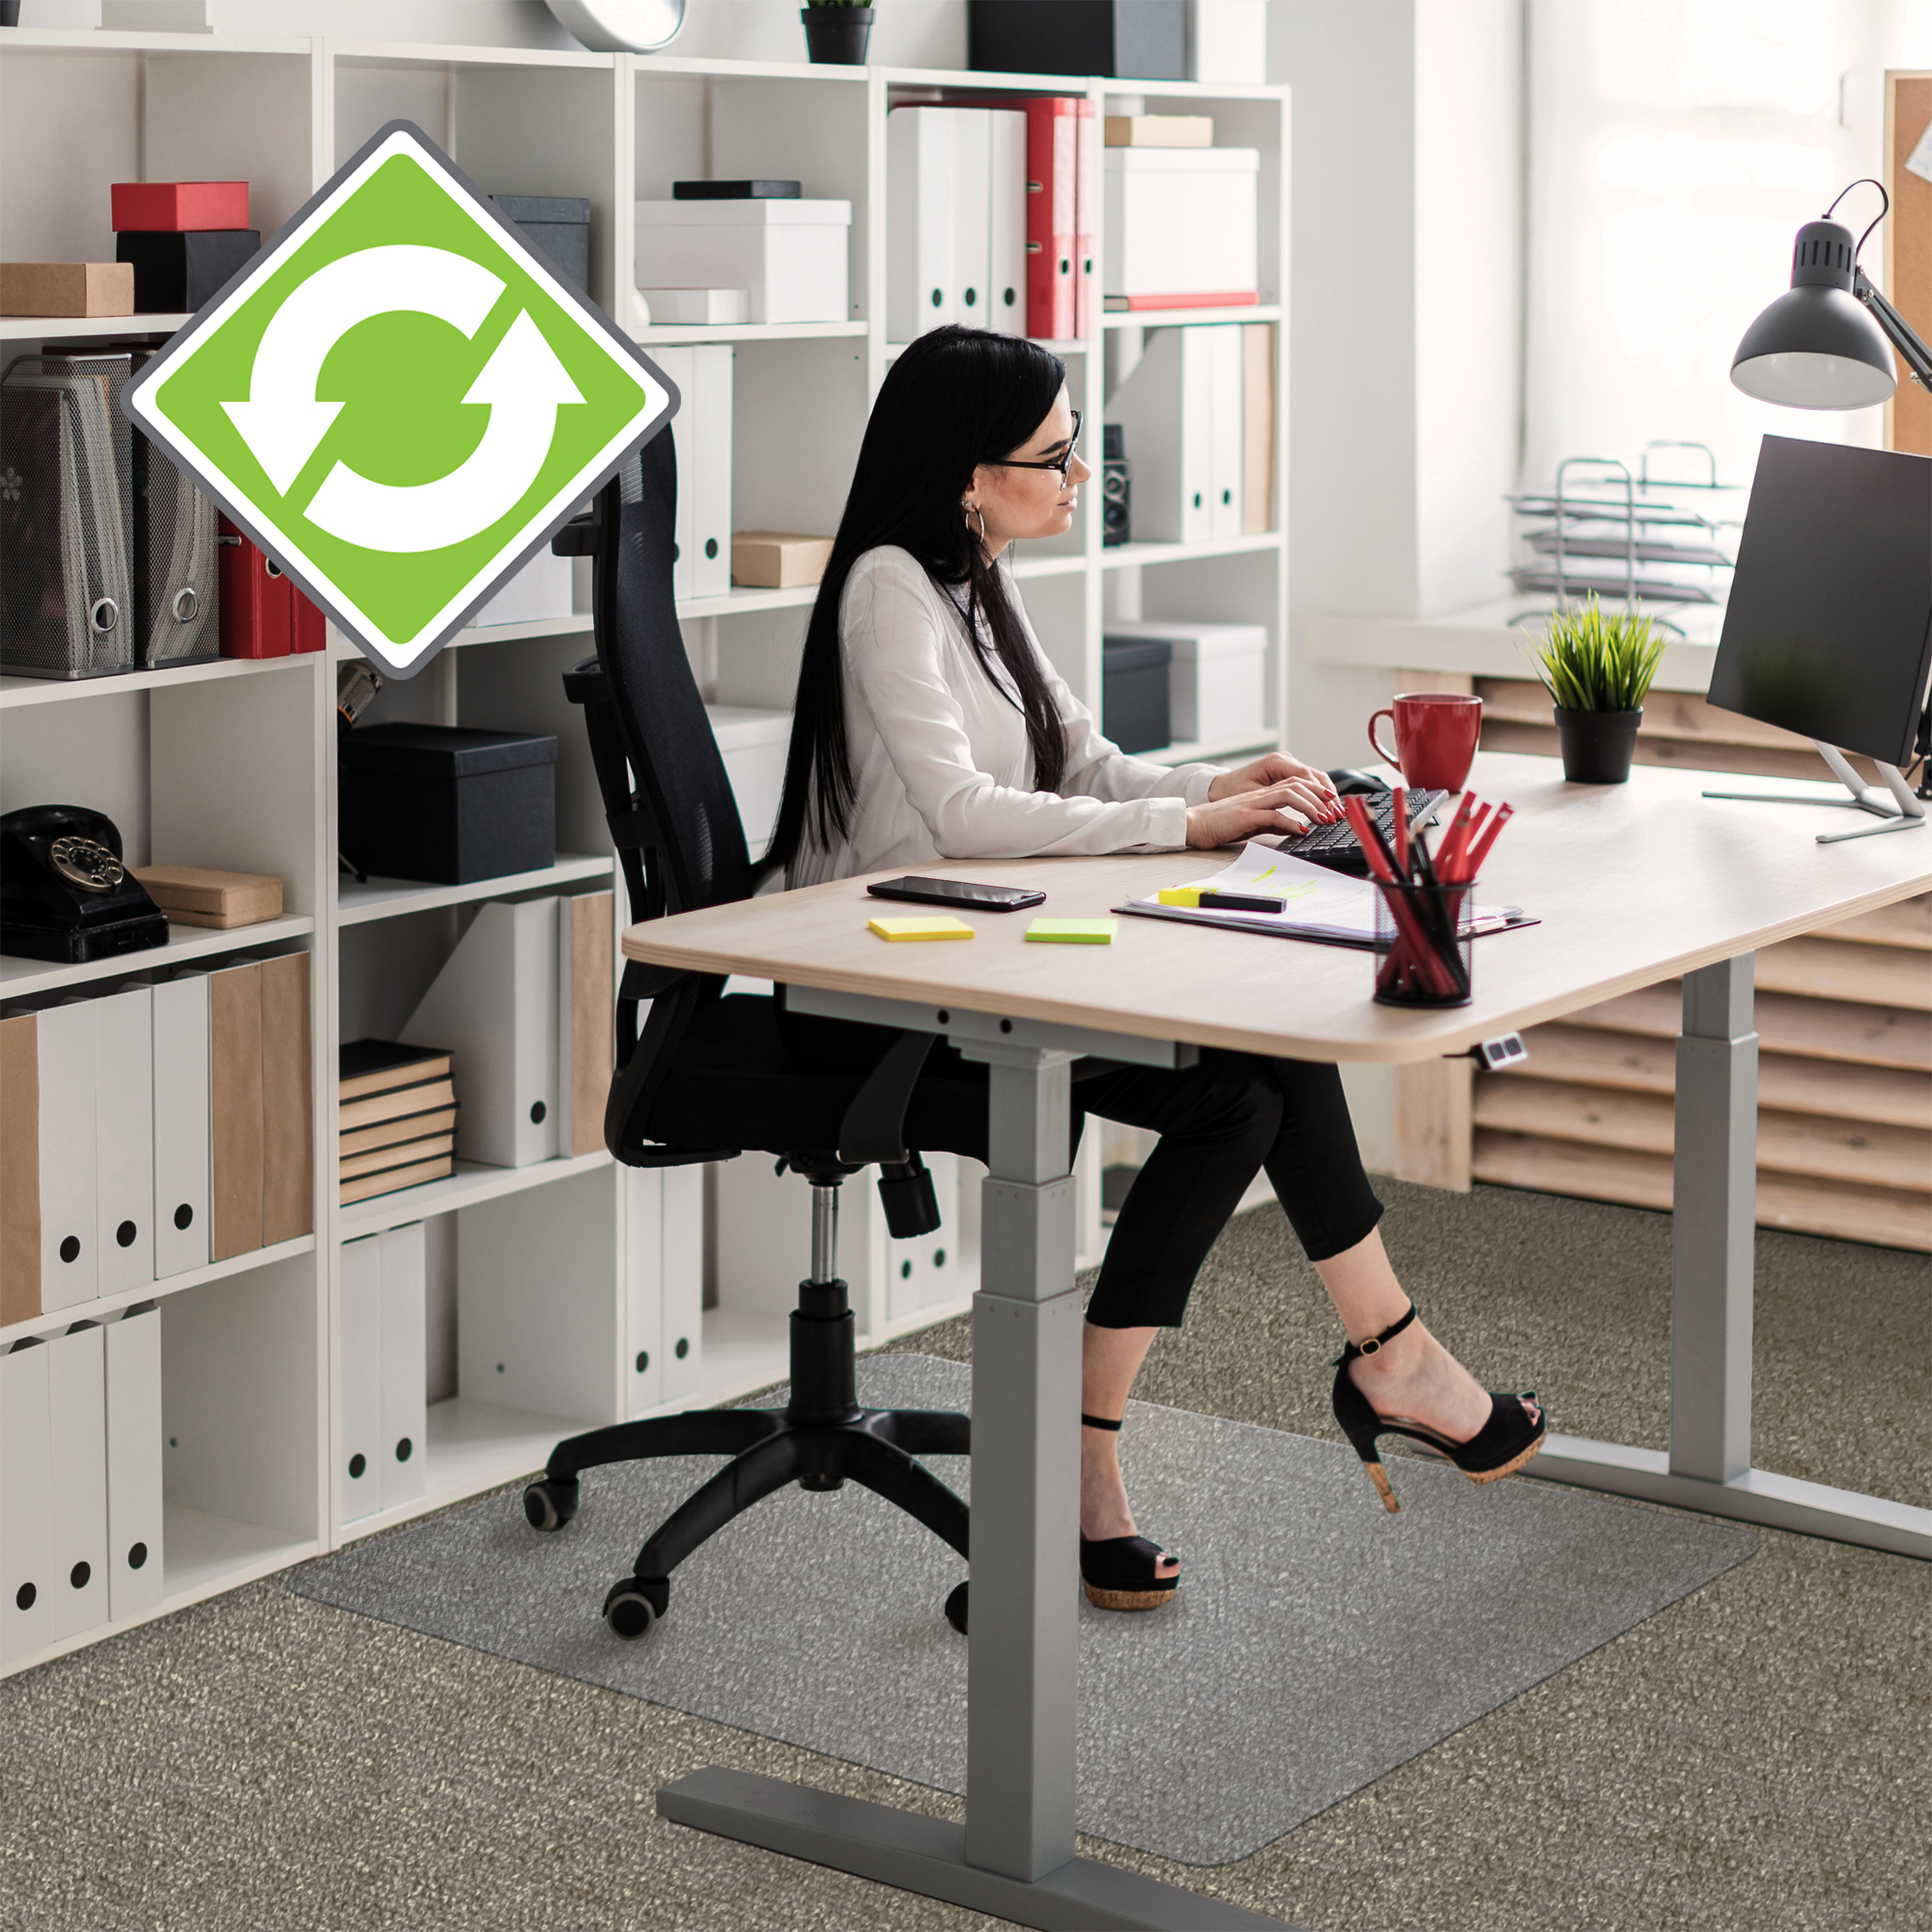 FLOORTEX Ecotex , Ecotex Rect Chair Mat Carpets up to 3/8Inch-39x48Inch, Length 39 in, Width 48 in, Material Plastic, Model FRECO113948EP